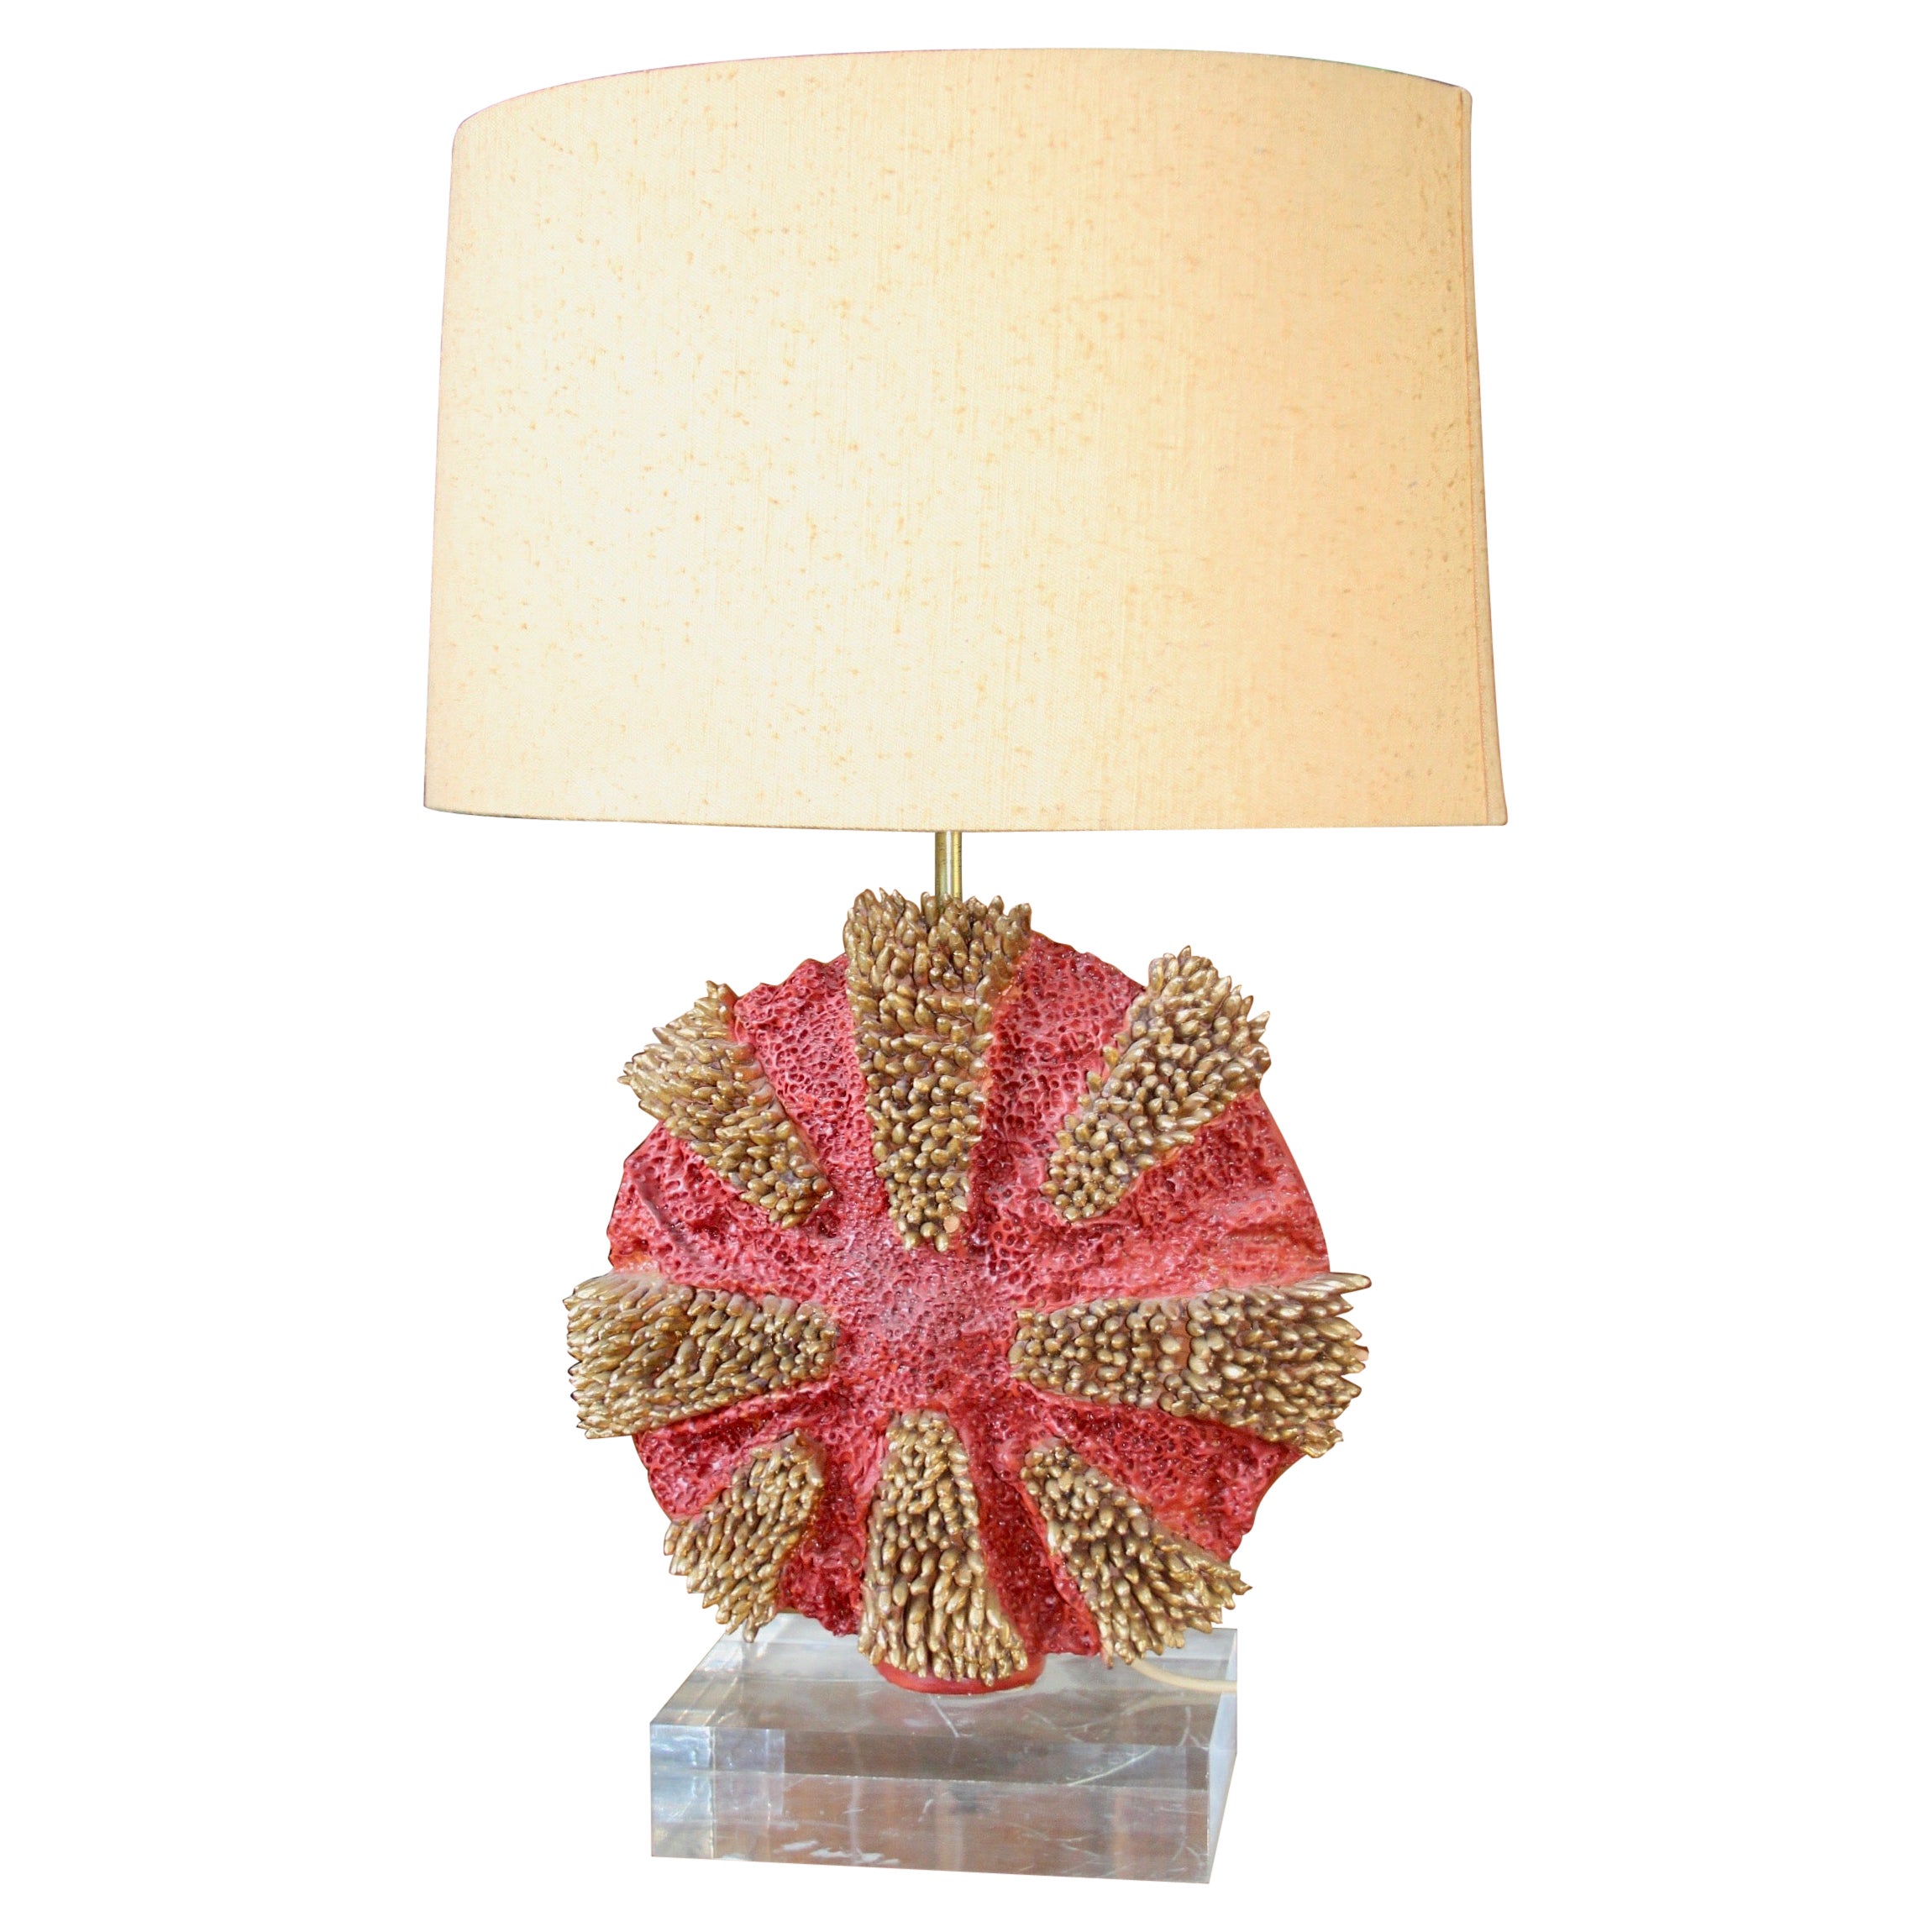 Ceramic coral table lamp For Sale